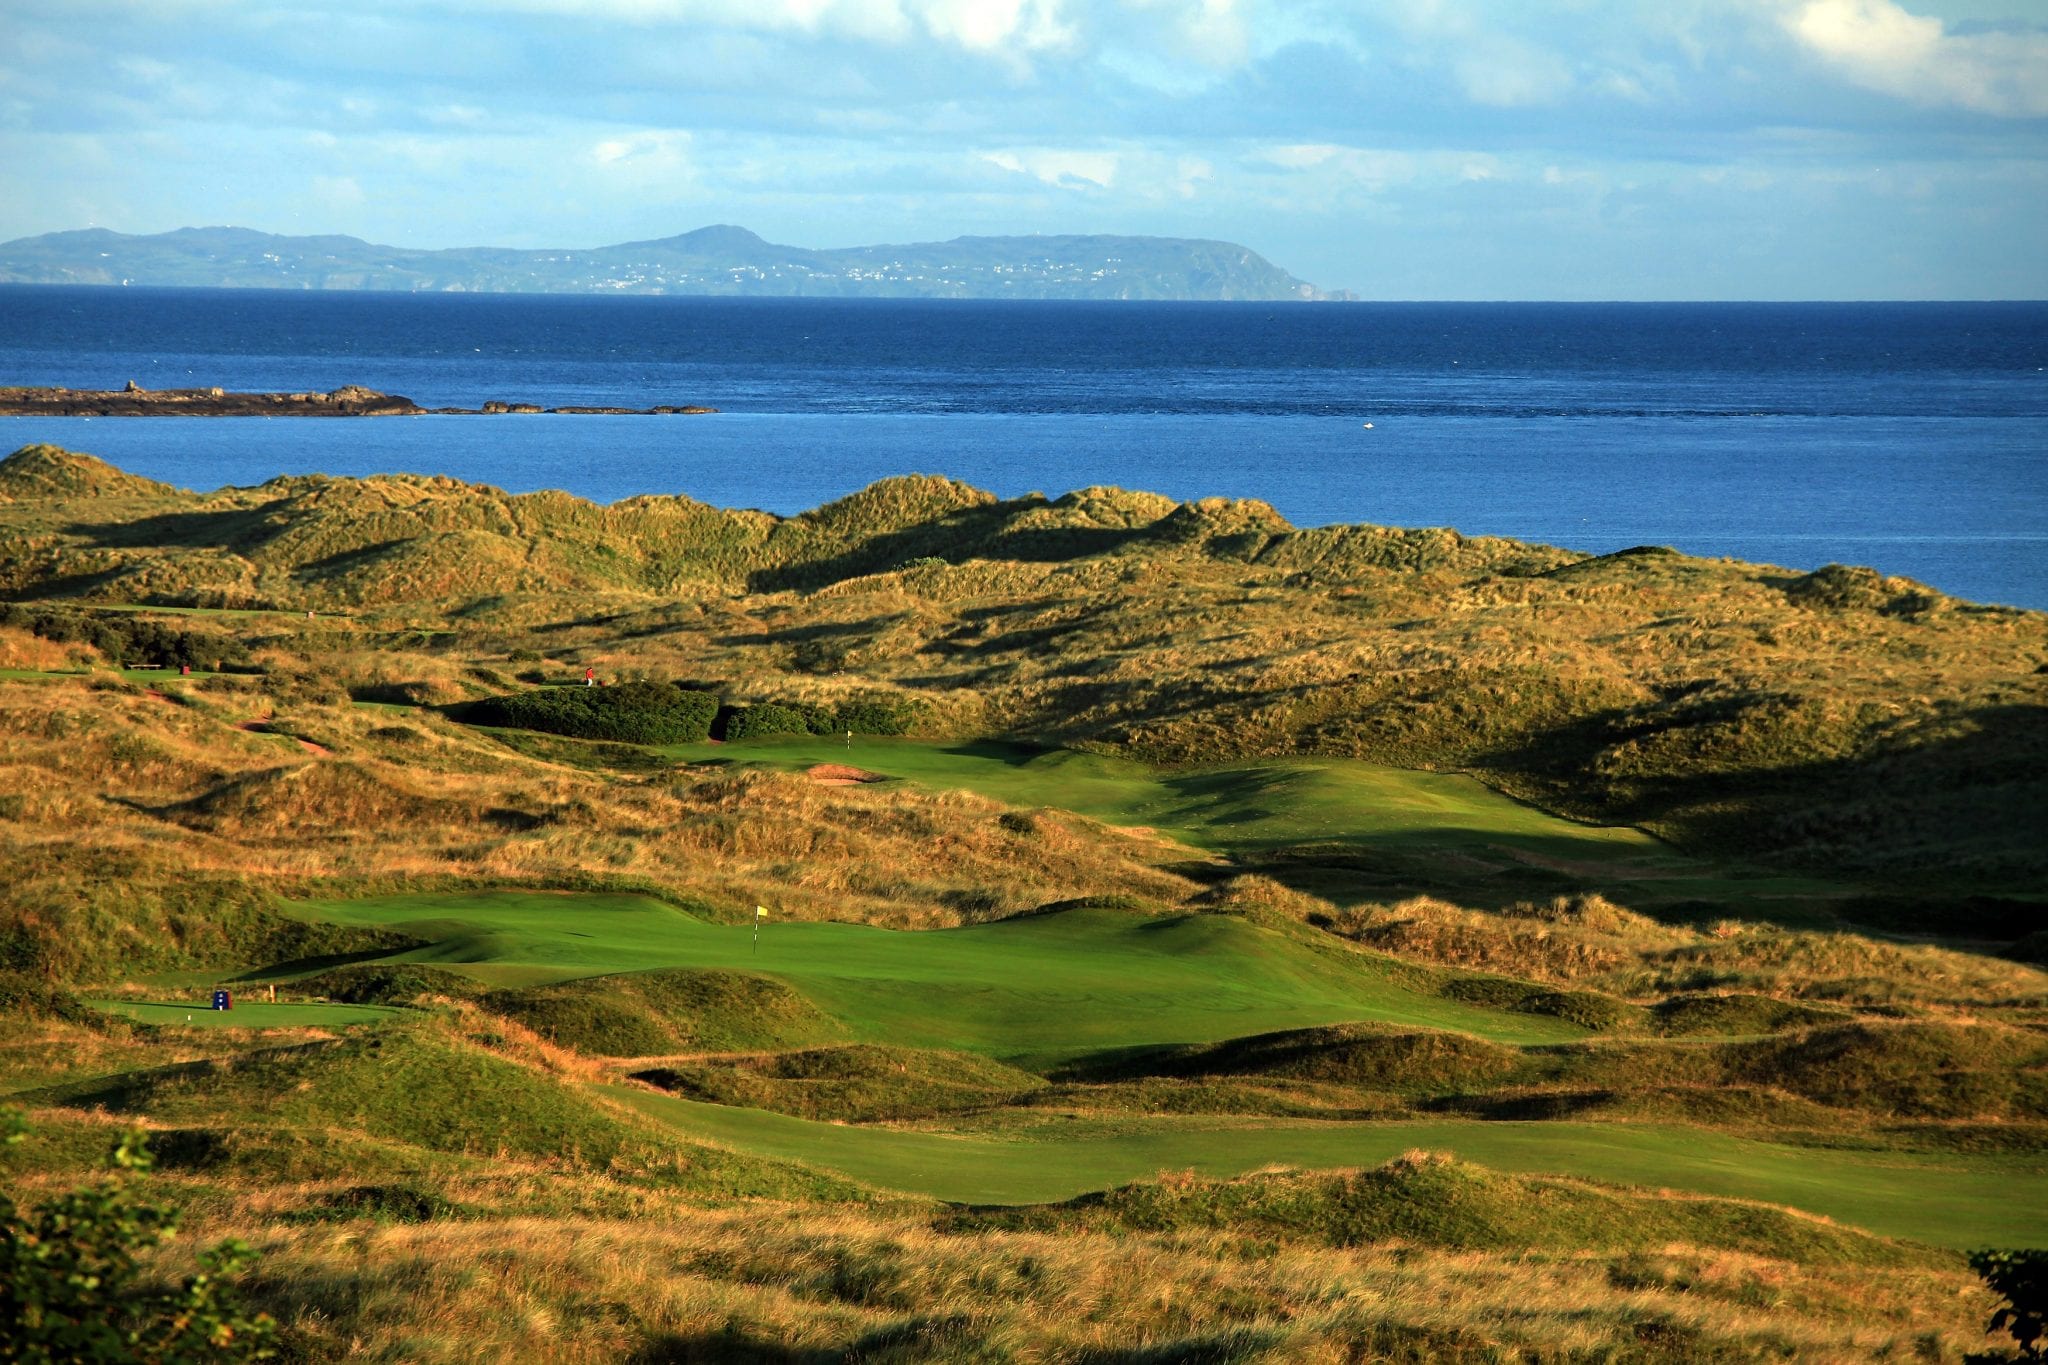 Image of the links golf course looking out to sea at Royal Portrush Dunluce Golf Course, Portrush, County Antrim, Northern Ireland